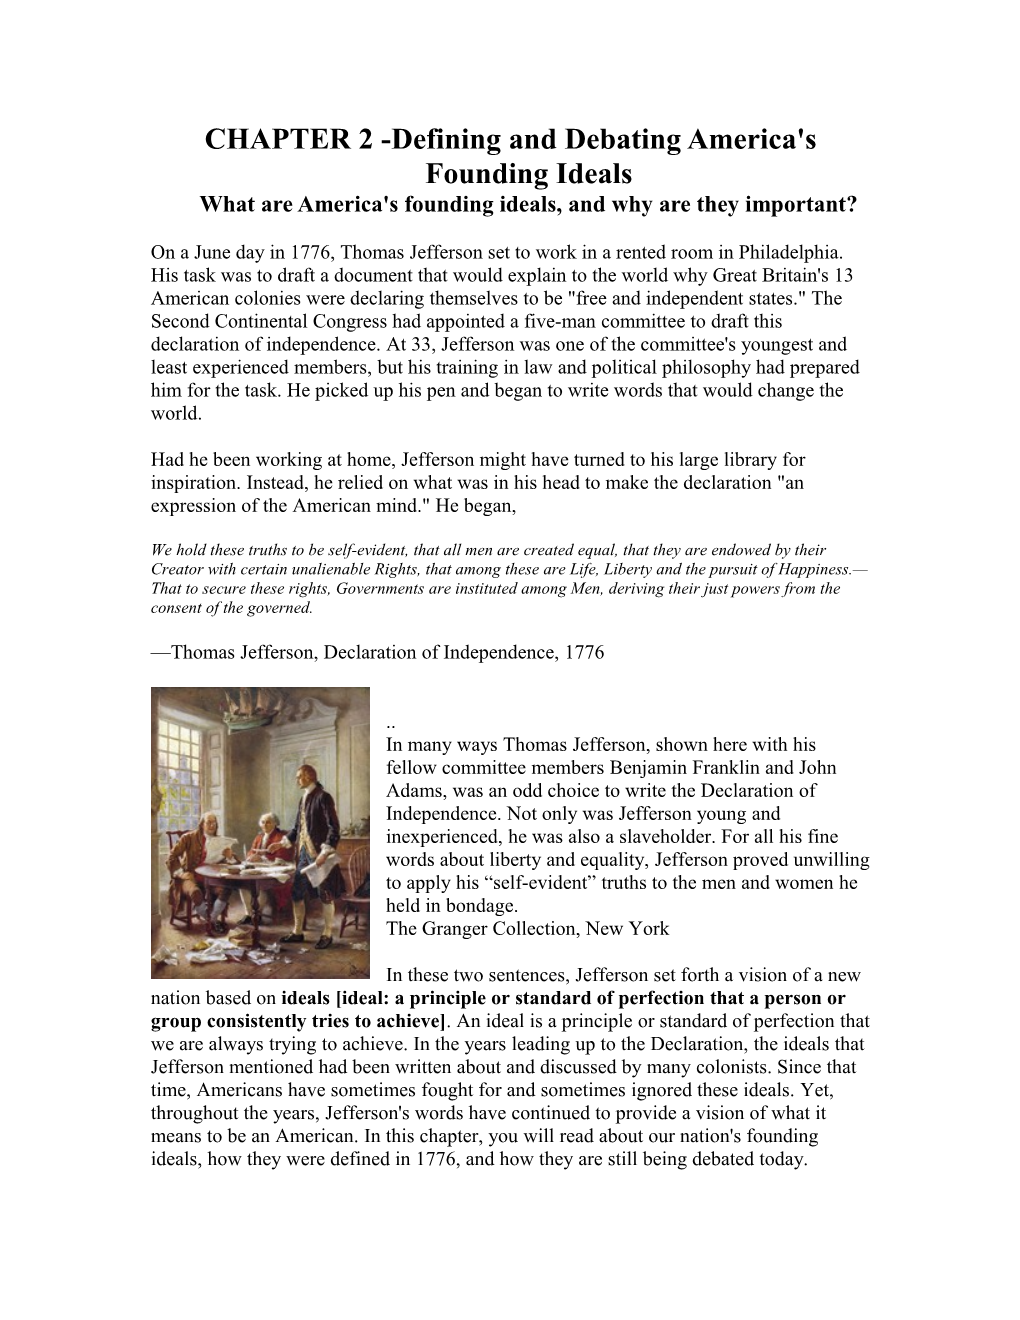 CHAPTER 2 -Defining and Debating America's Founding Ideals